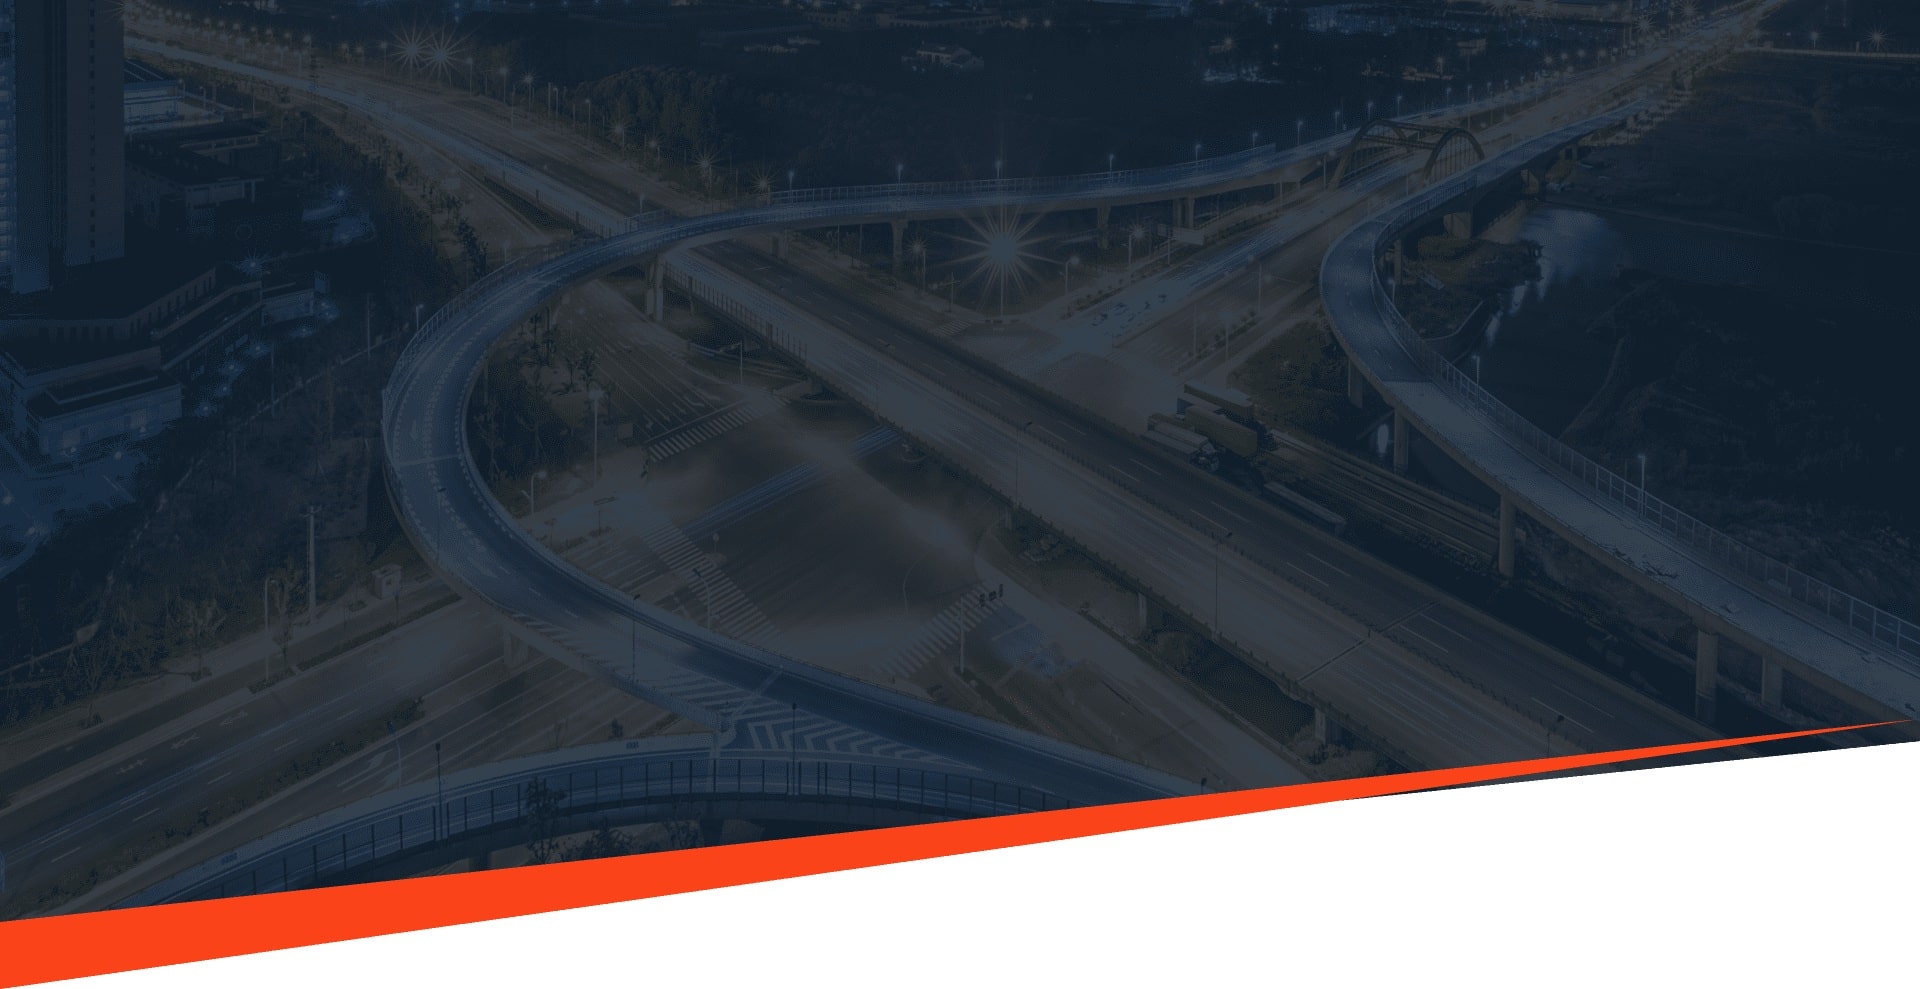 We are Traffic Engineers and 
we provde solutions for safer streets with
expertise in planning, design, and operation.